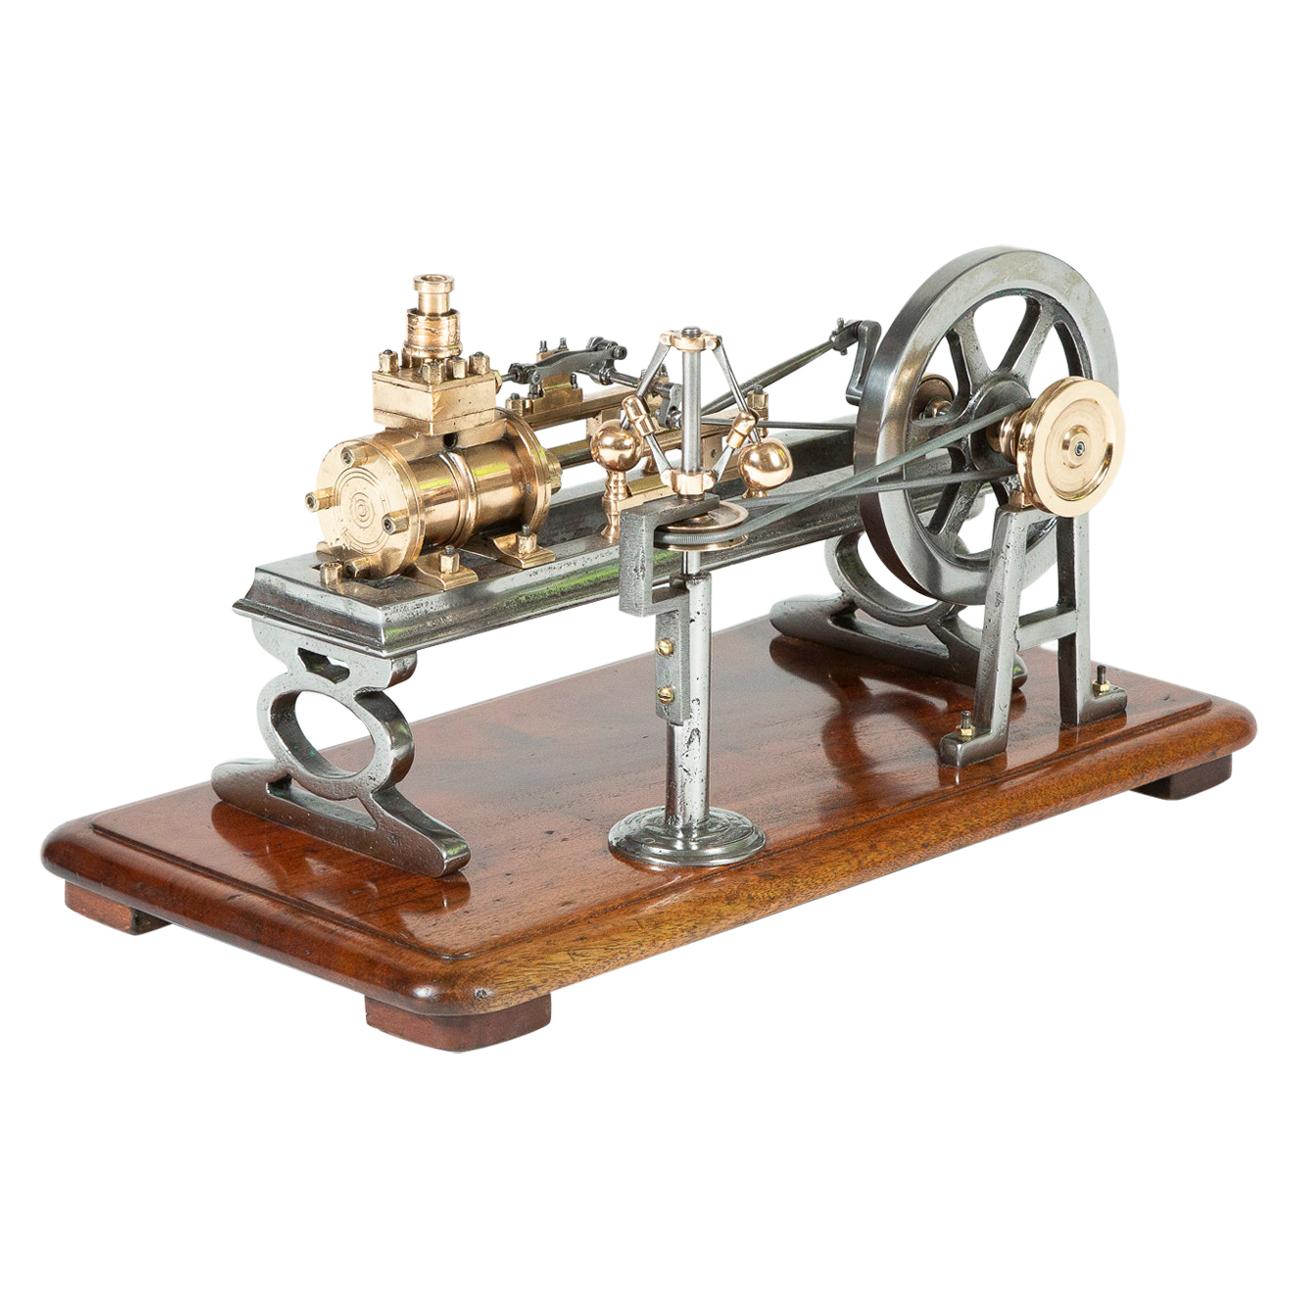 Tabletop Model of a Single Cylinder Steam Engine